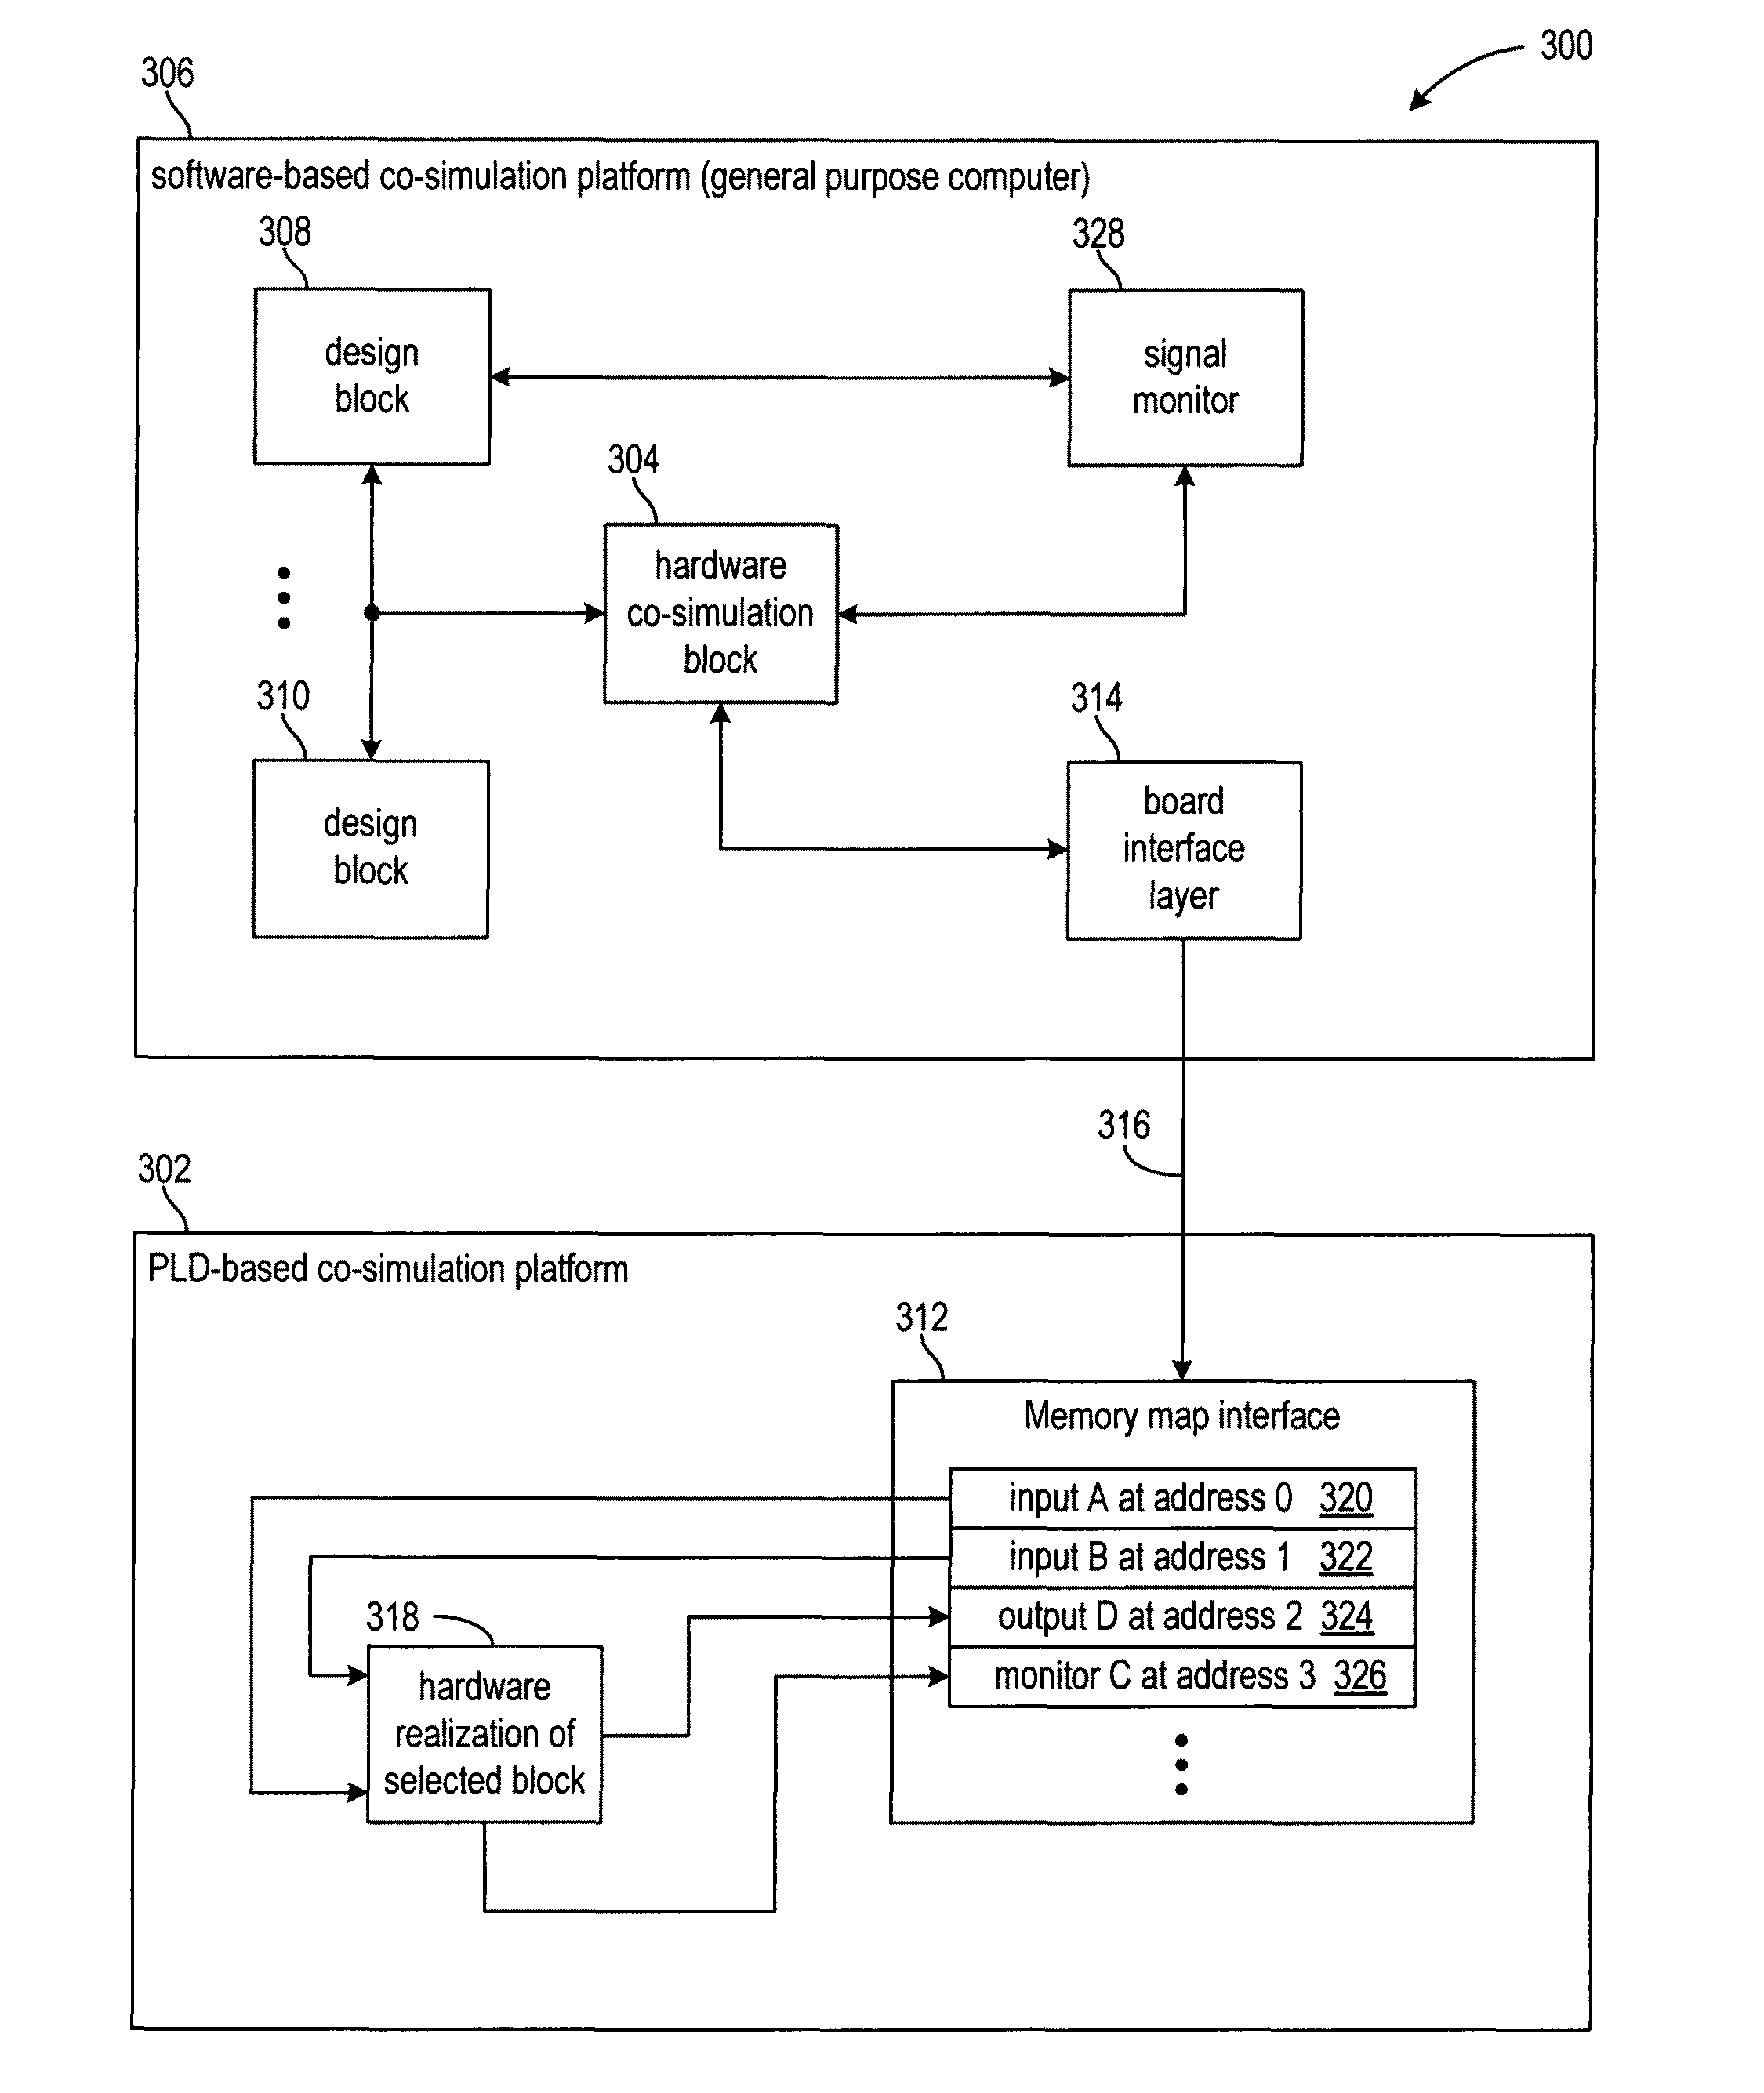 Displaying signals of a design block emulated in hardware co-simulation